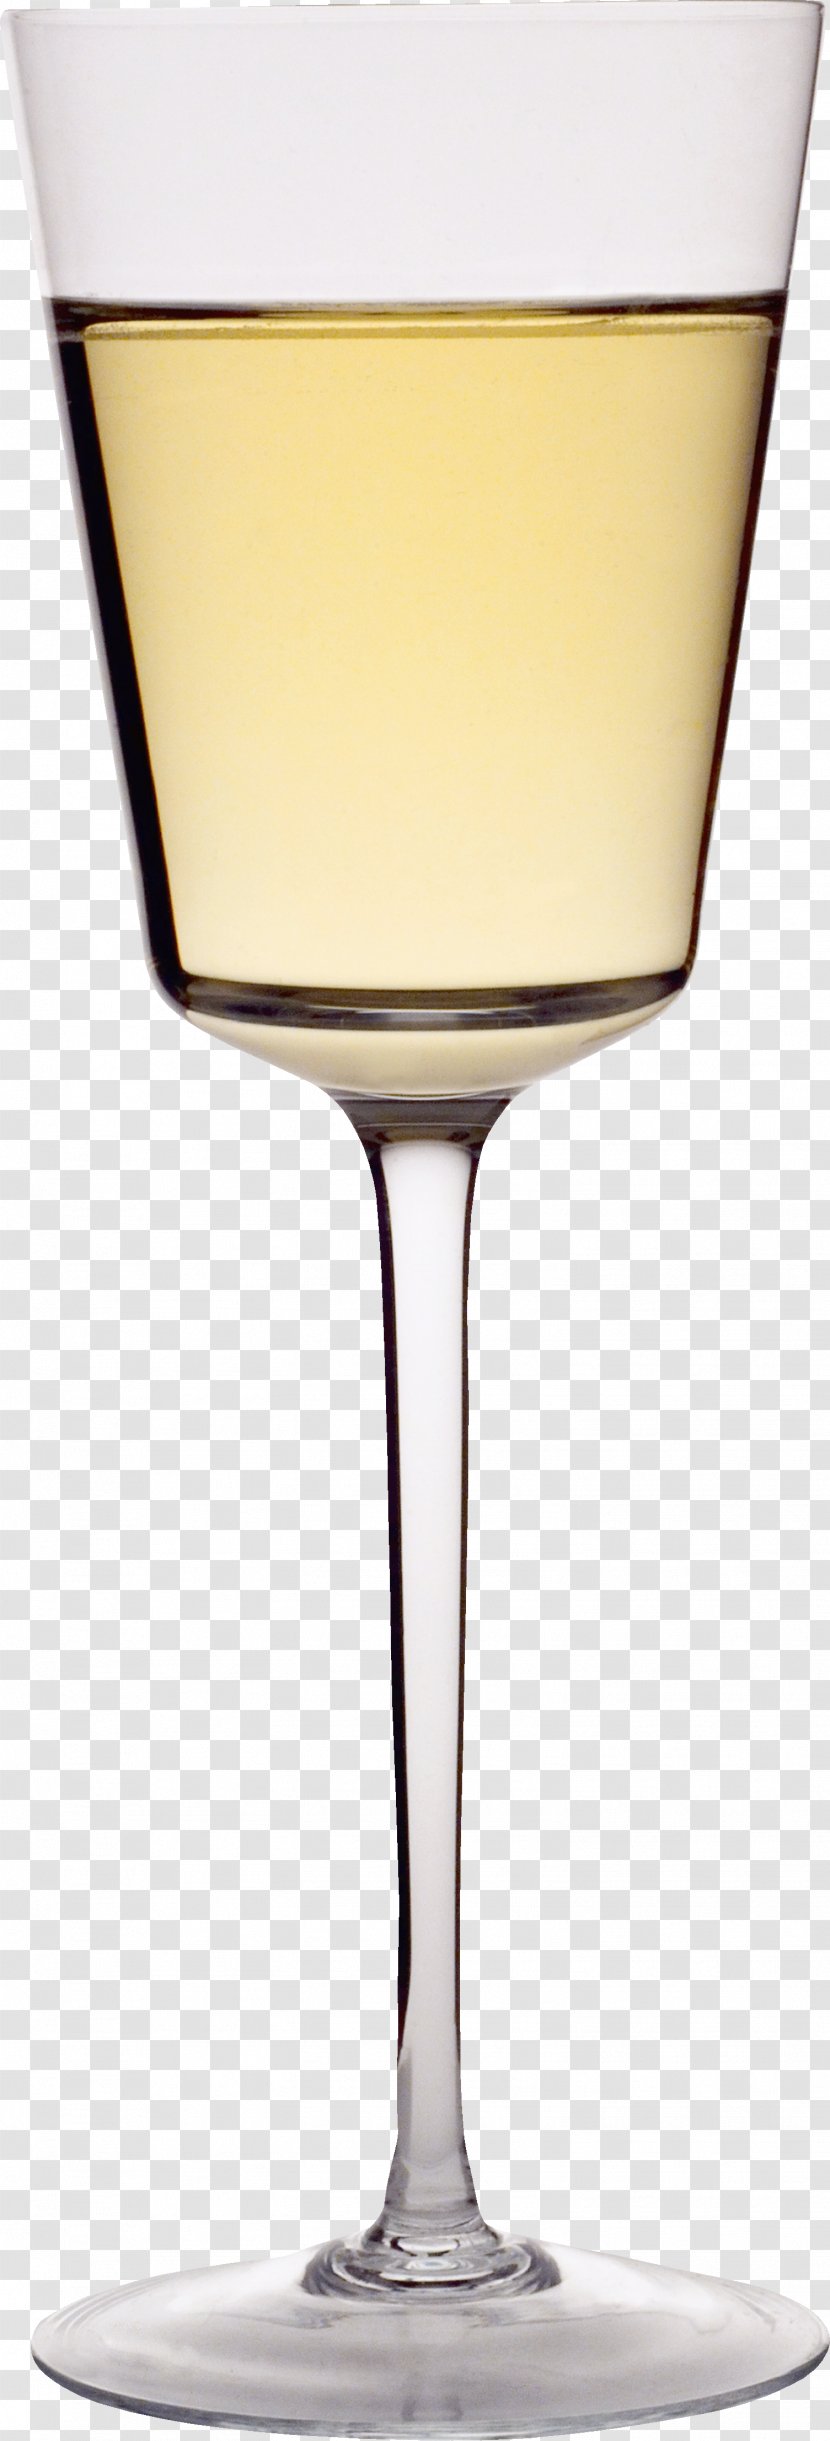 Red Wine Glass Cocktail Champagne - Image Transparent PNG